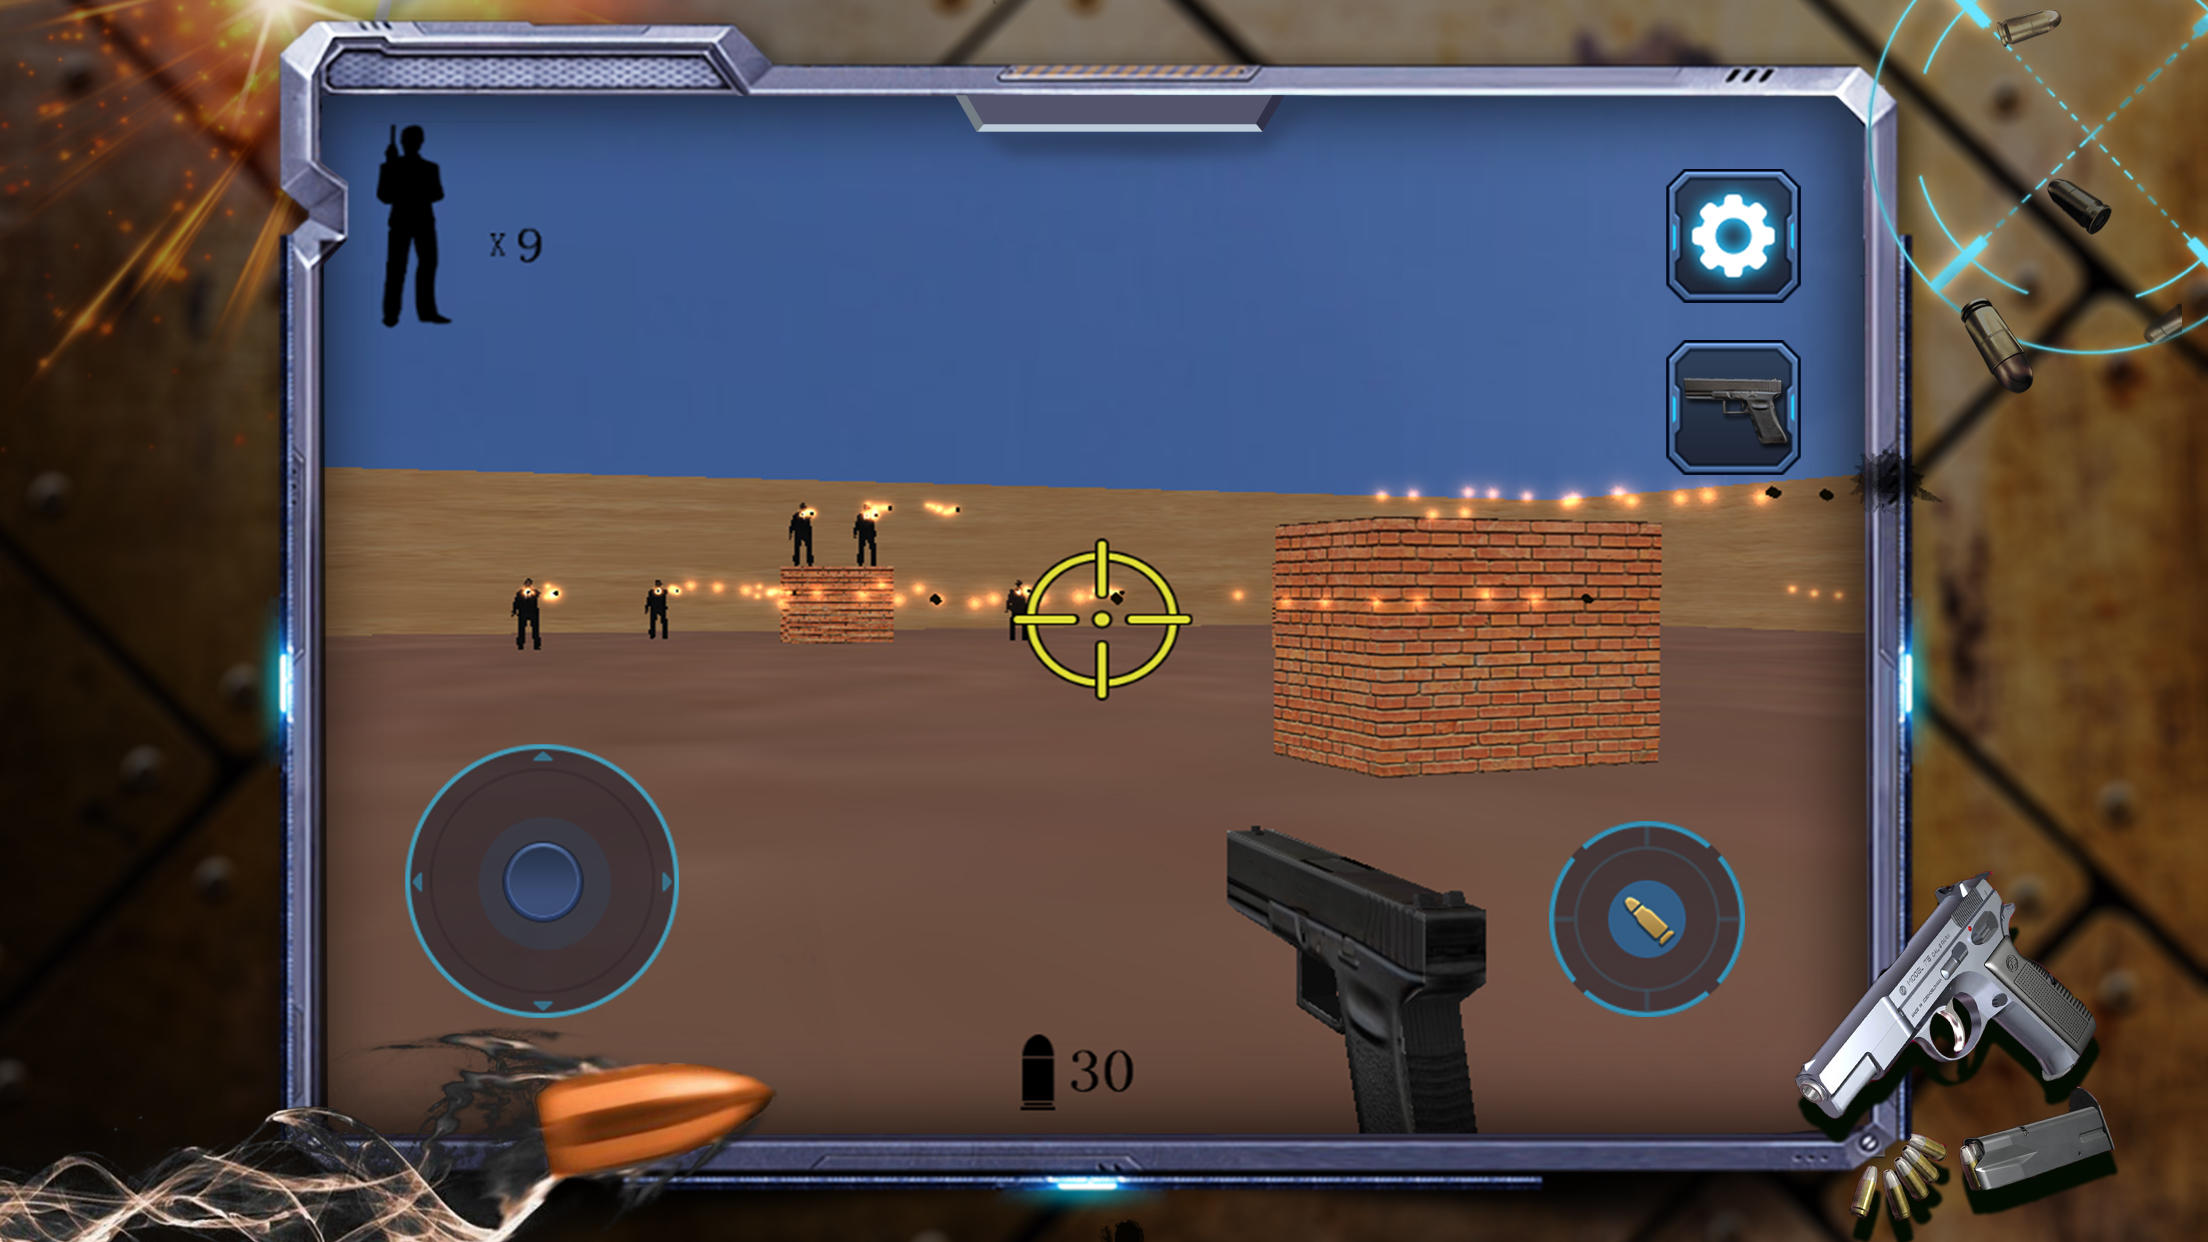 Shooting King APK for Android Download